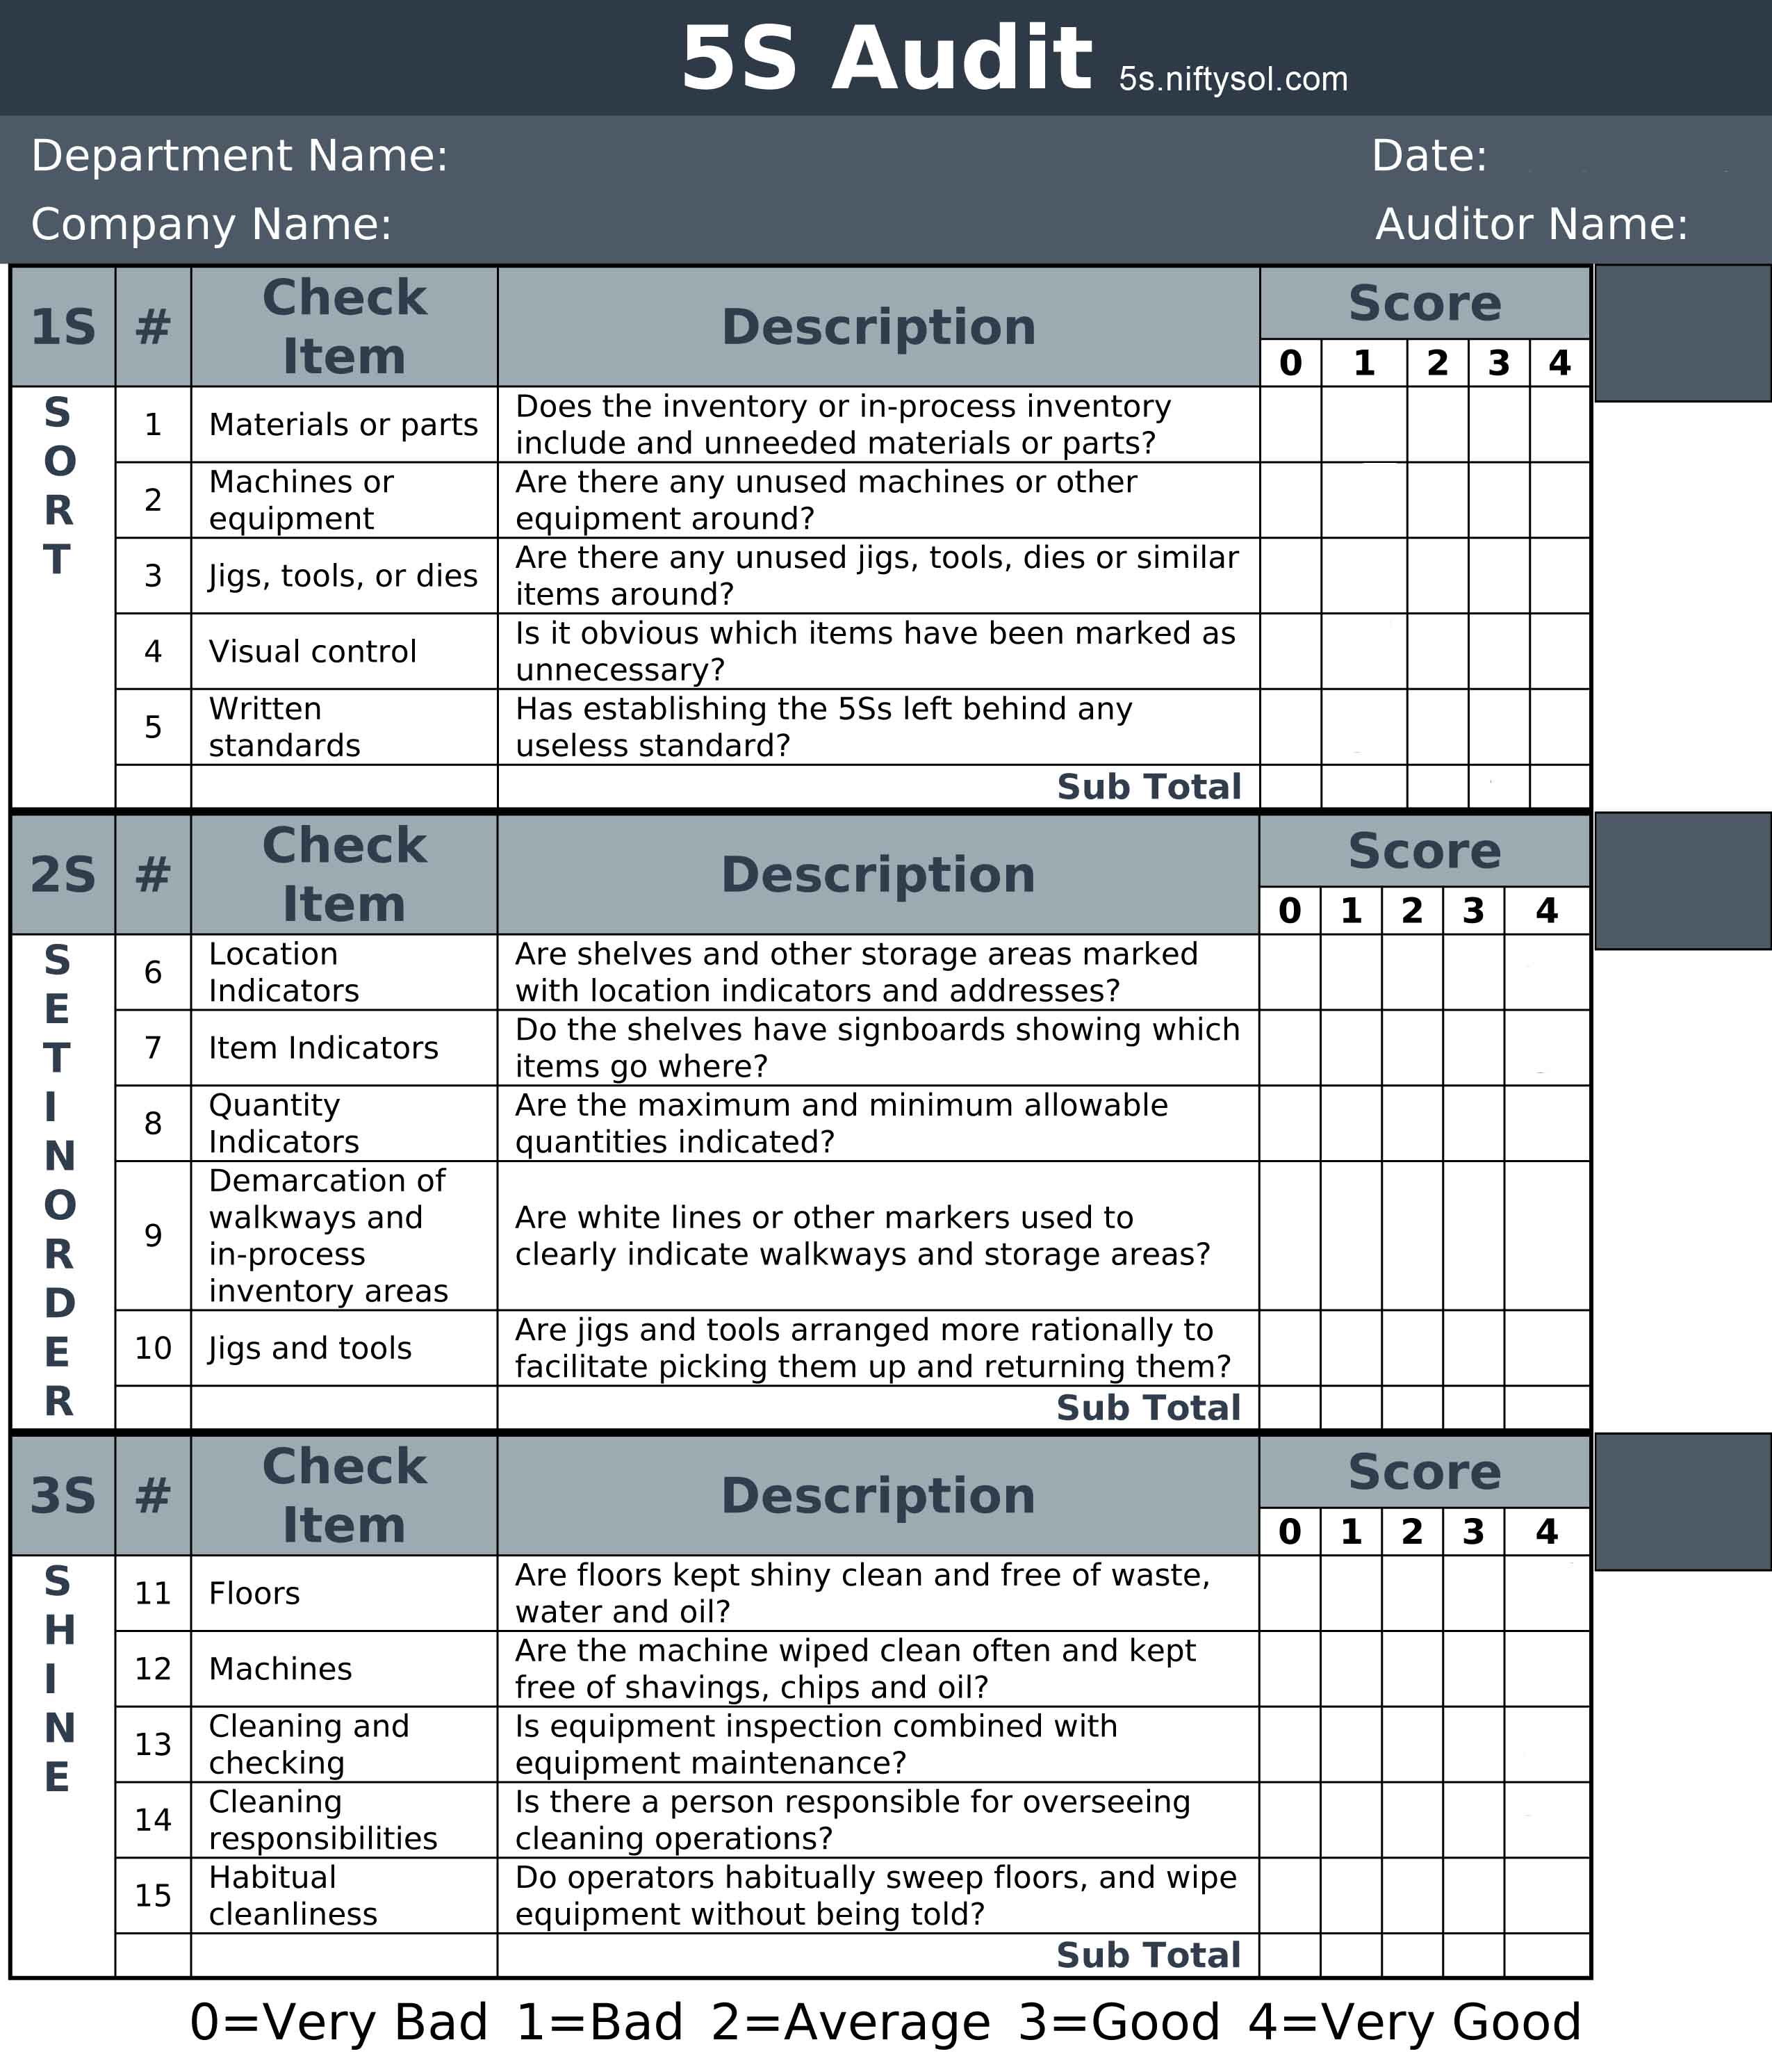 5s checklist - cloud solution for manufacturing|5s| iso audit|lean